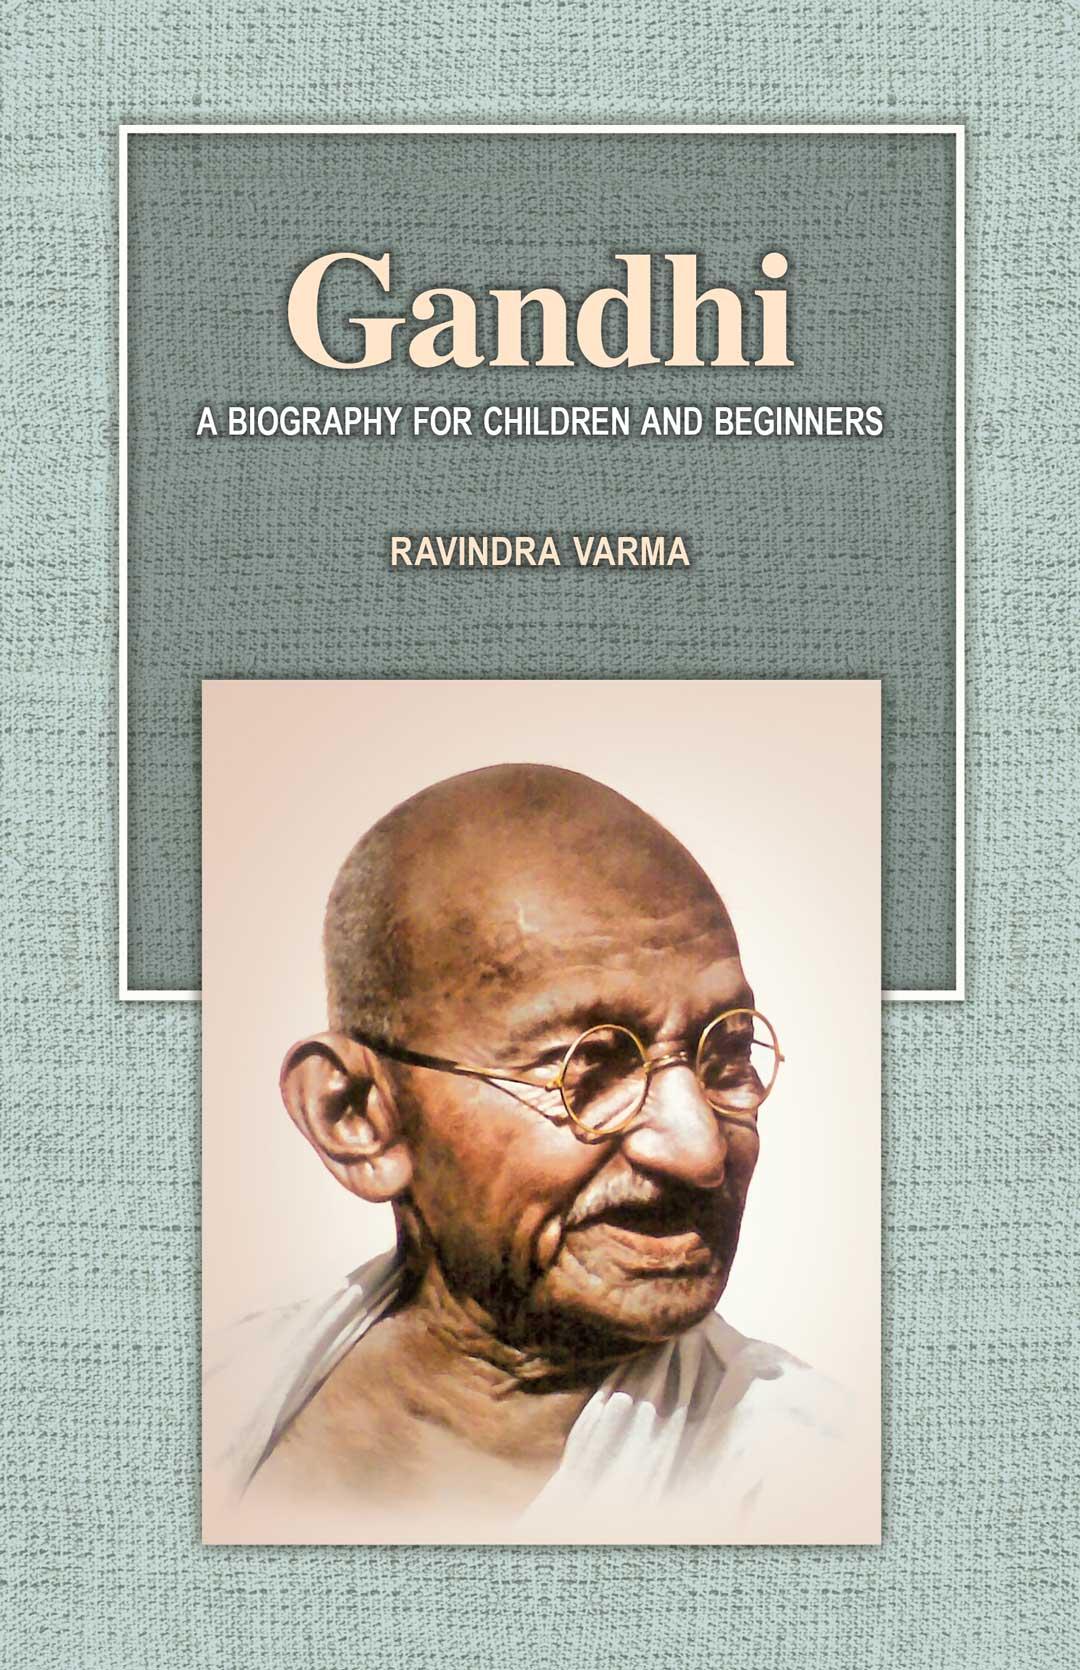 Gandhi [A Biography for Children and Beginners]